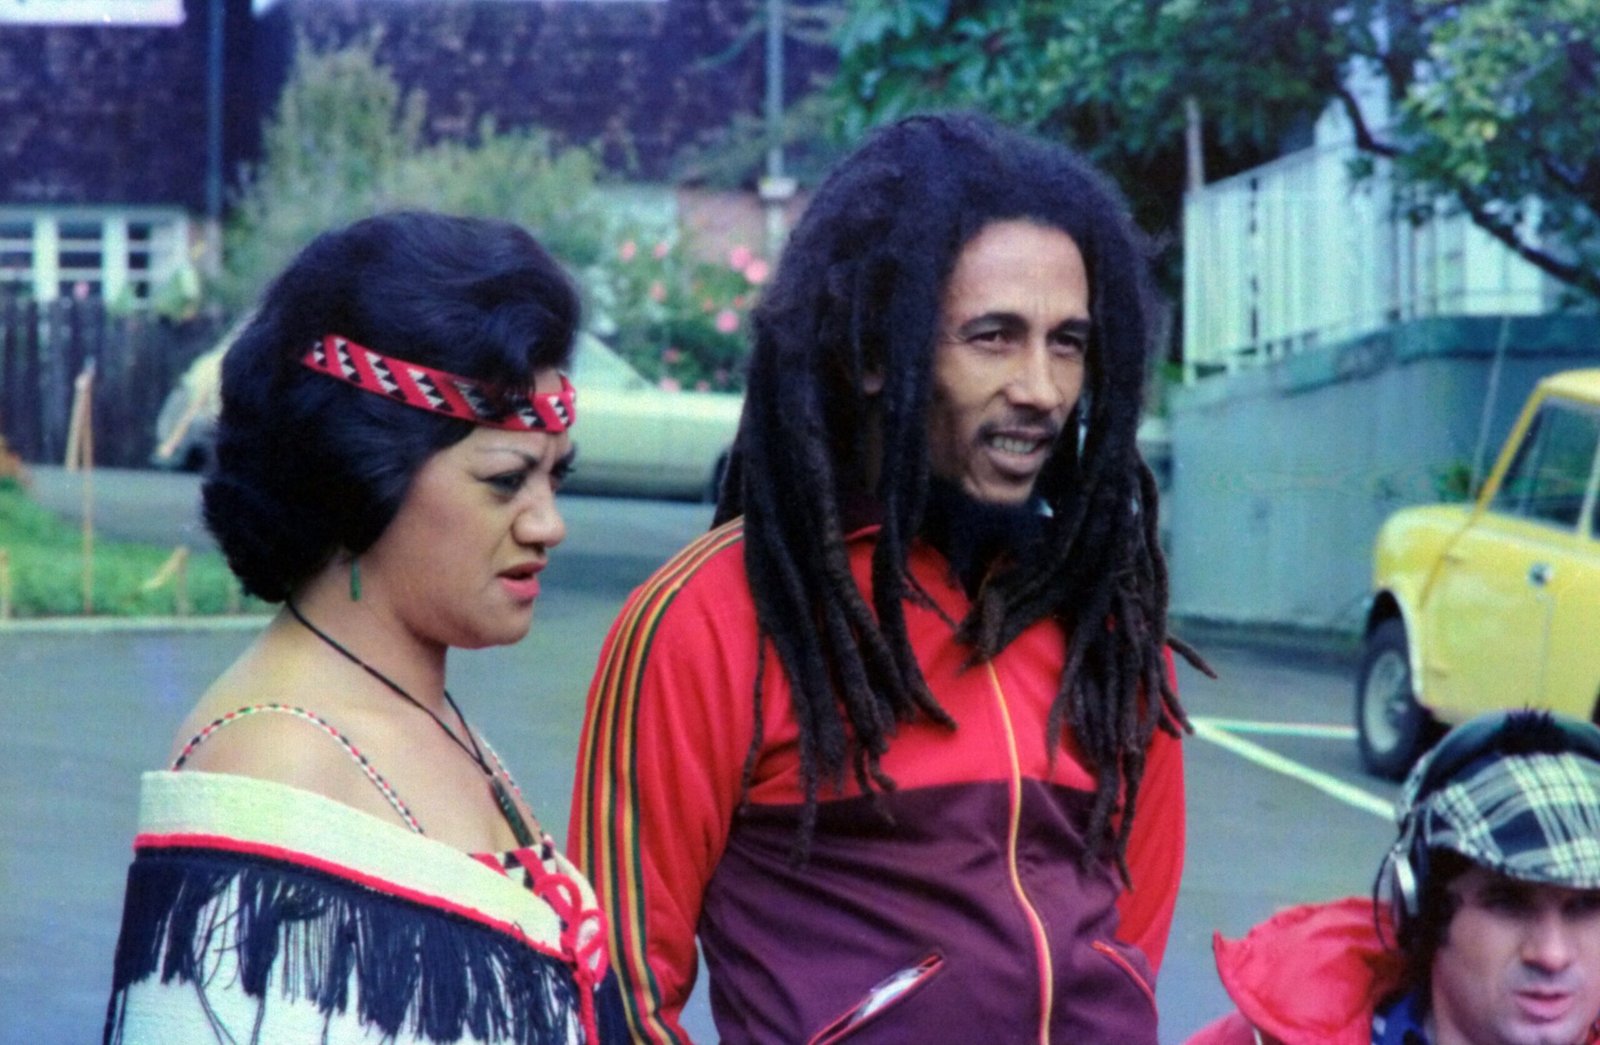 Bob Marley standing beside woman during daytime